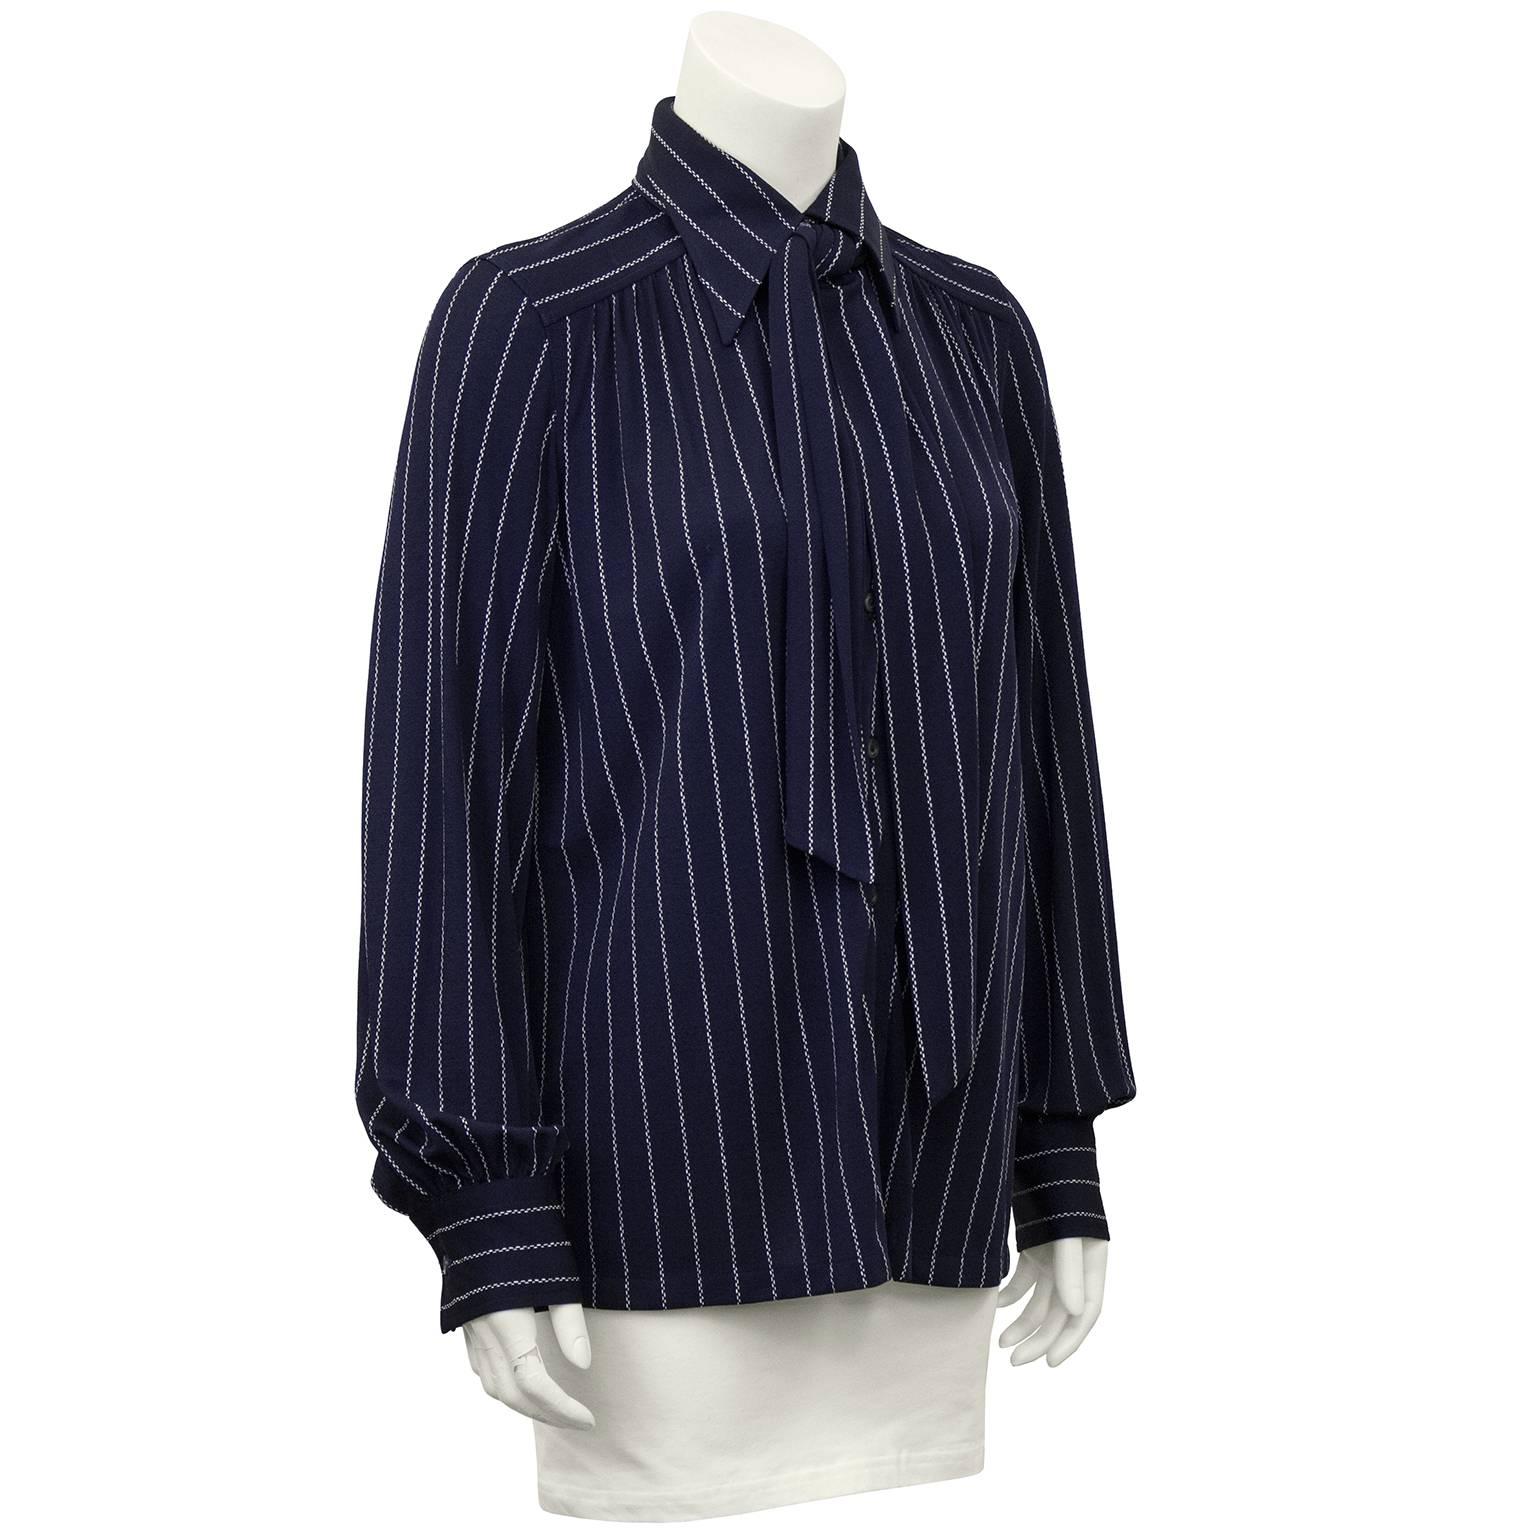 Late 1970's navy blue and white pin stripe silk blouse. Exaggerated collar, bishop sleeves and optional neck tie that can be styled to your liking. Excellent vintage condition. Fits like a US 8. 

Sleeve 21